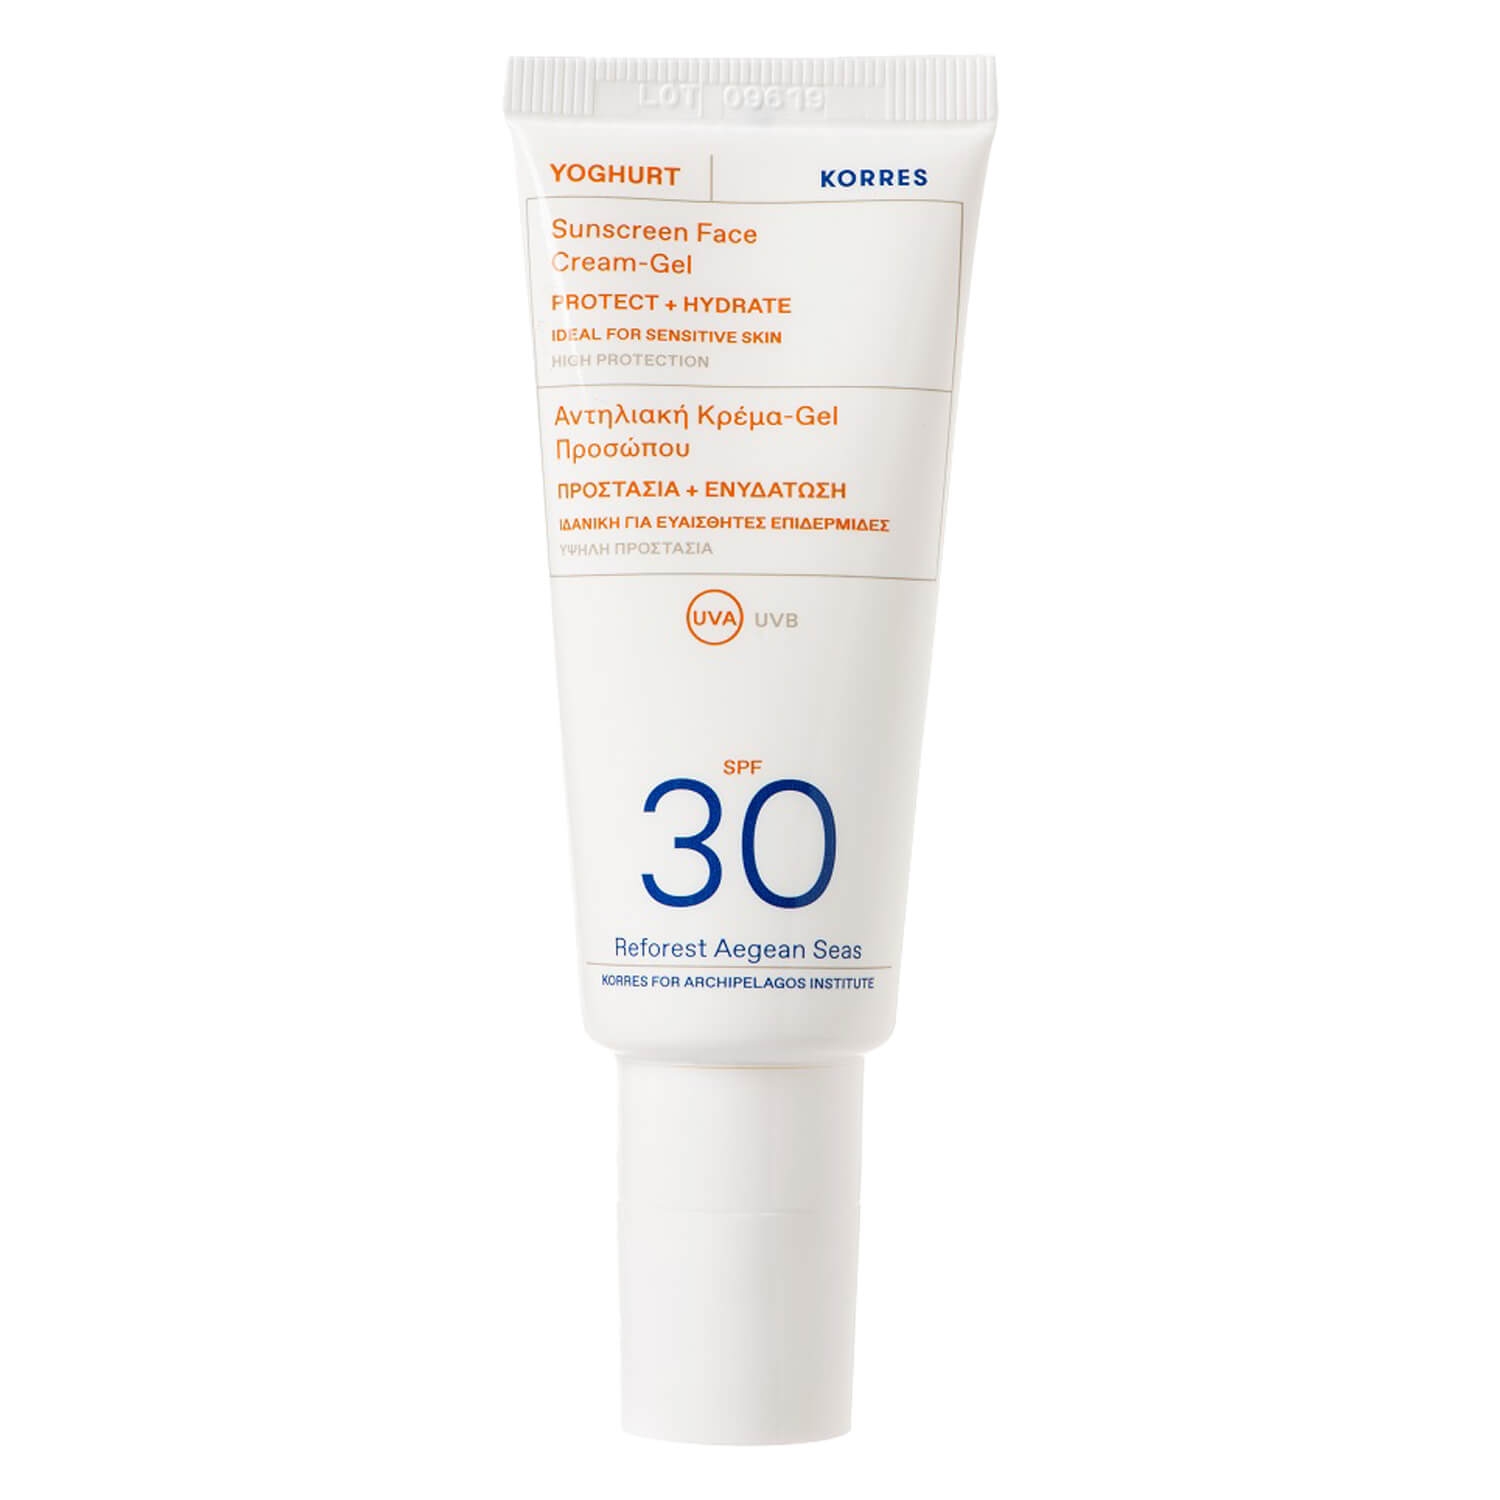 Product image from Korres Care - Yoghurt Sunscreen Face Cream-Gel SPF30